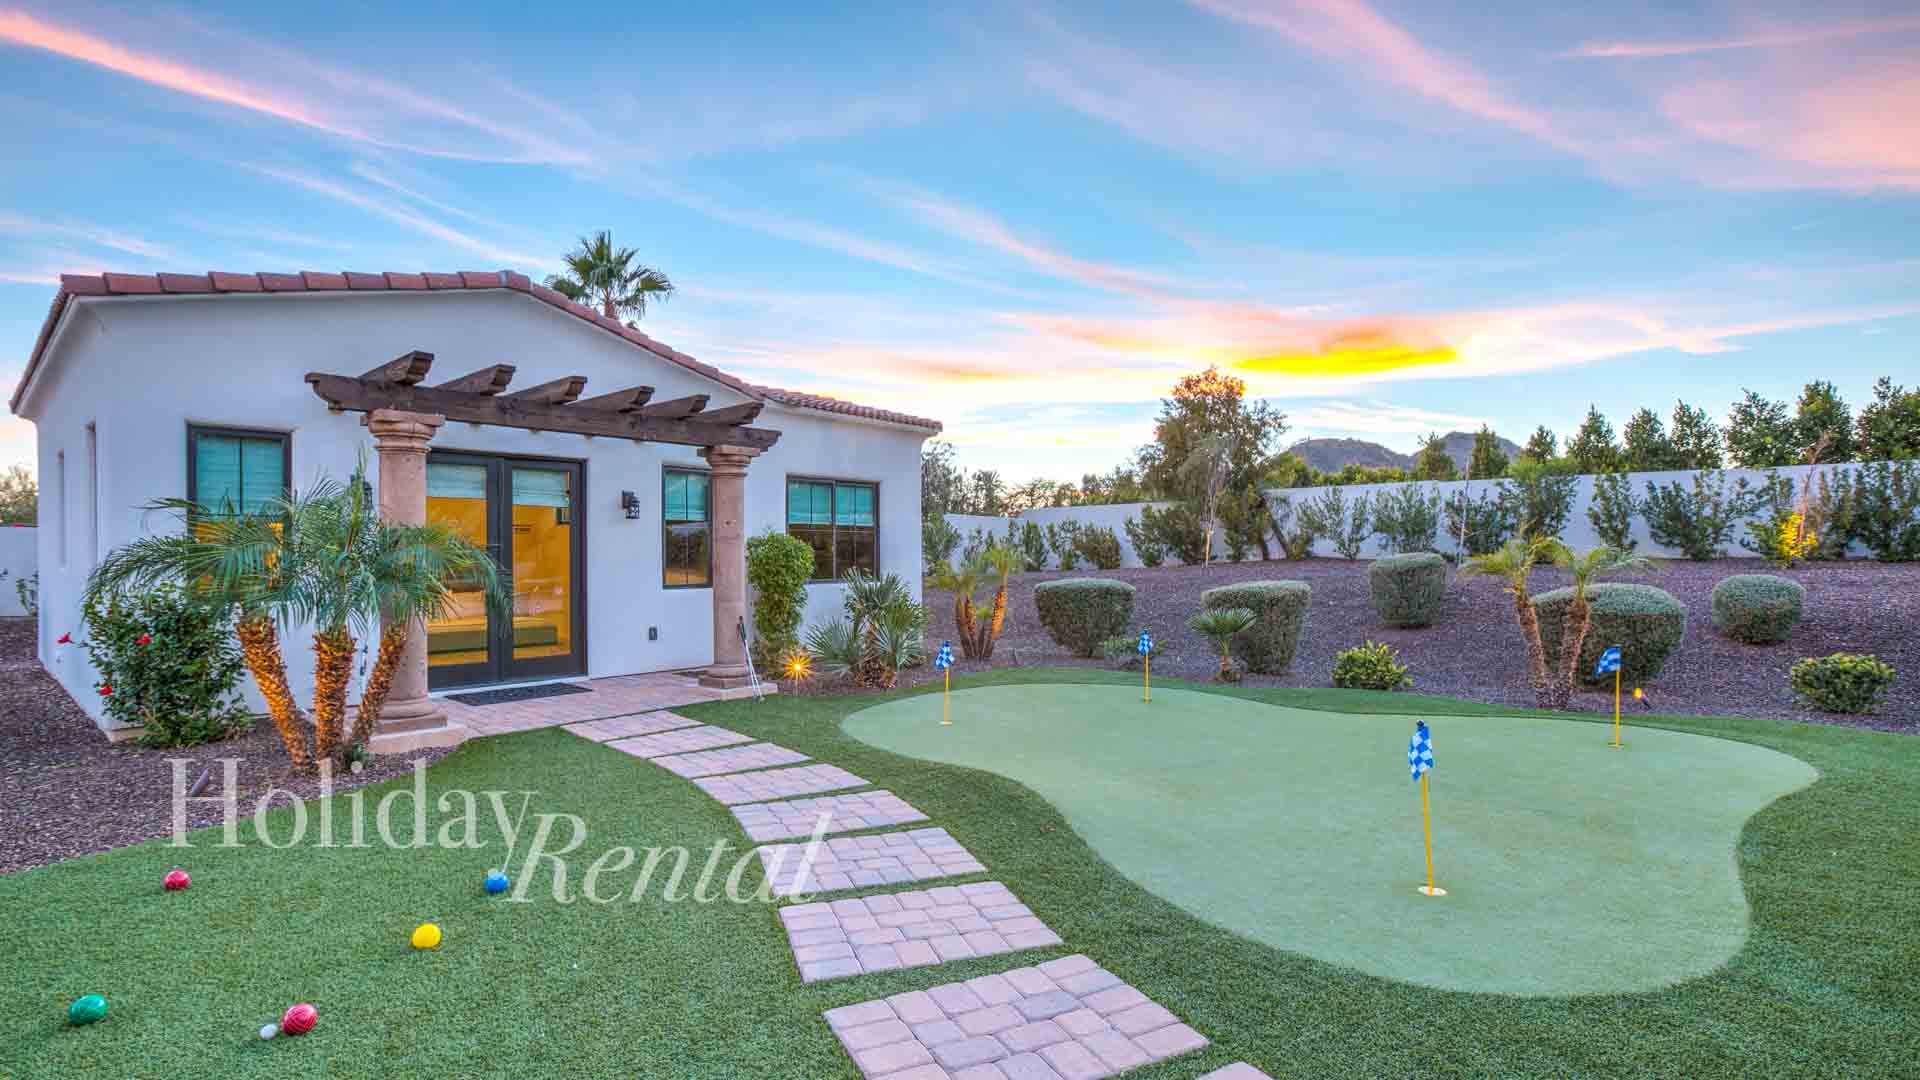 luxury vacation rental casita and putting green